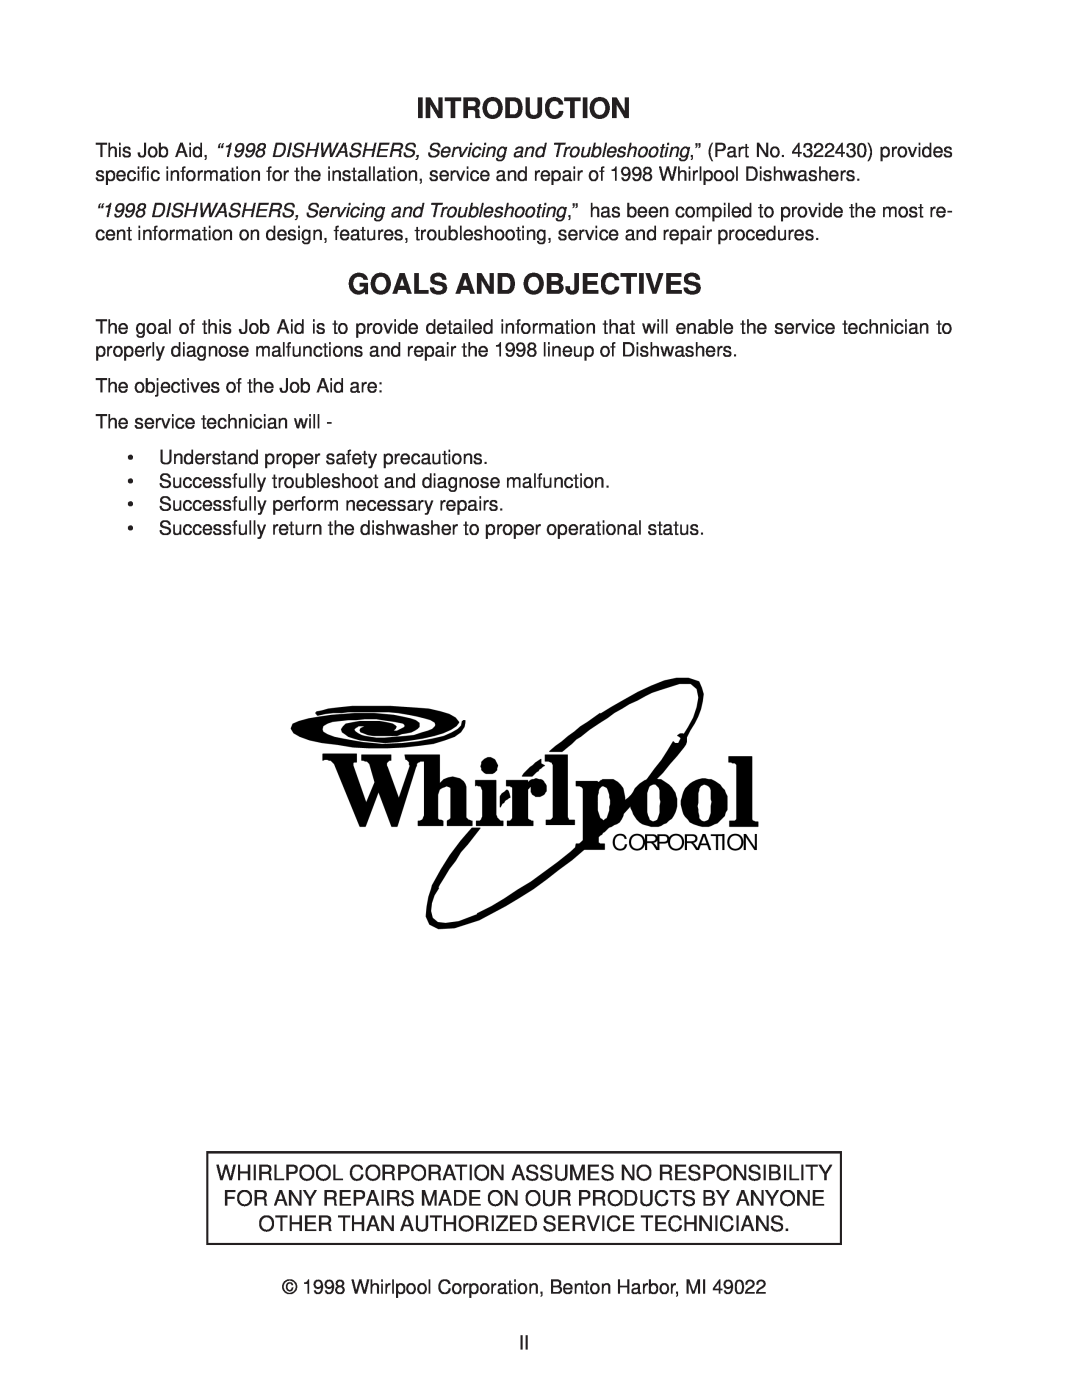 Kenmore DU920PFG, DU910PFG manual Introduction, Goals And Objectives, Whirlpool Corporation Assumes No Responsibility 